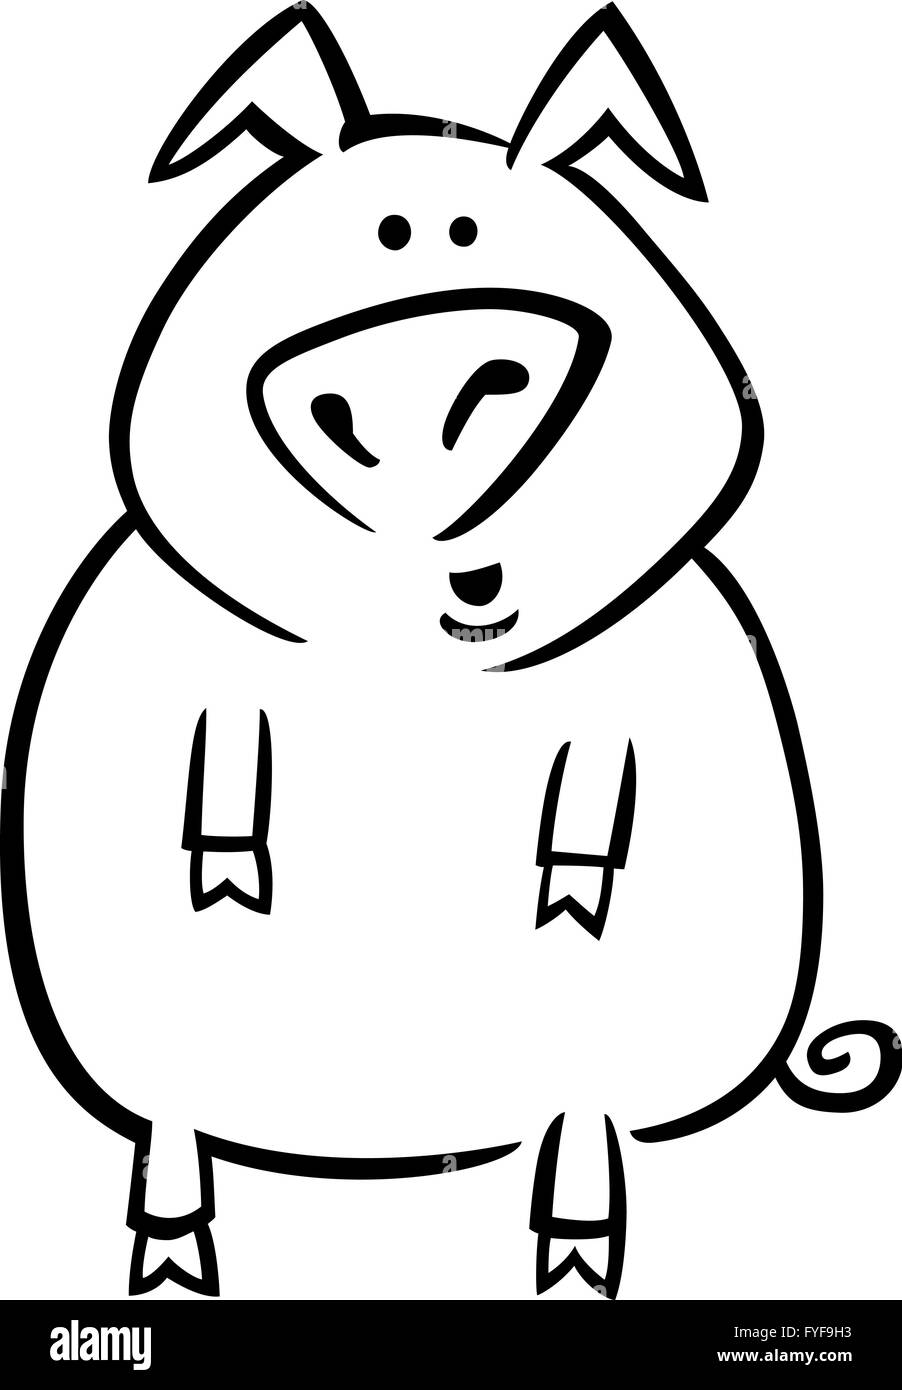 Cartoon pig for coloring page Stock Photo